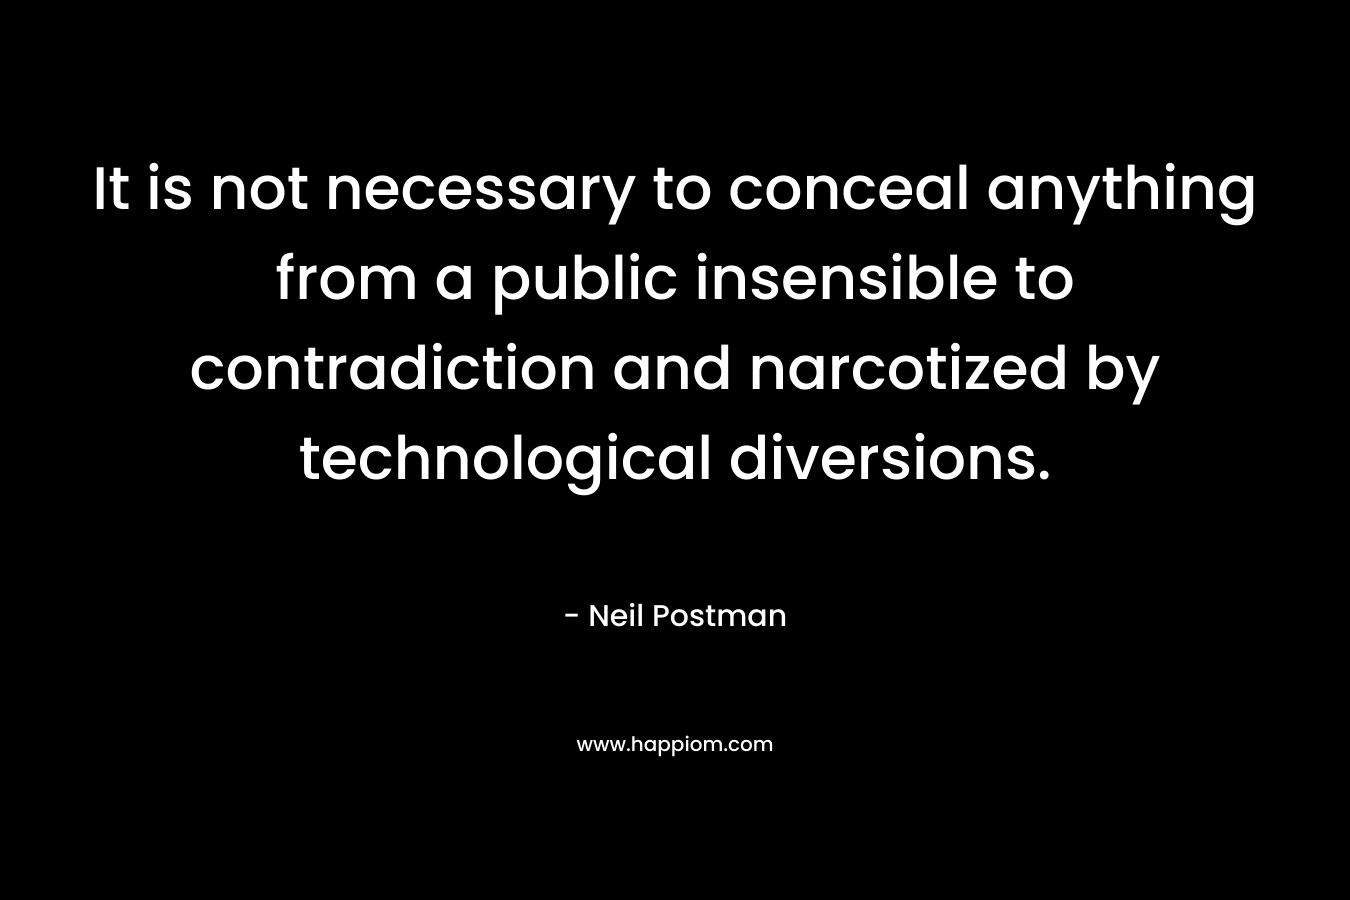 It is not necessary to conceal anything from a public insensible to contradiction and narcotized by technological diversions.